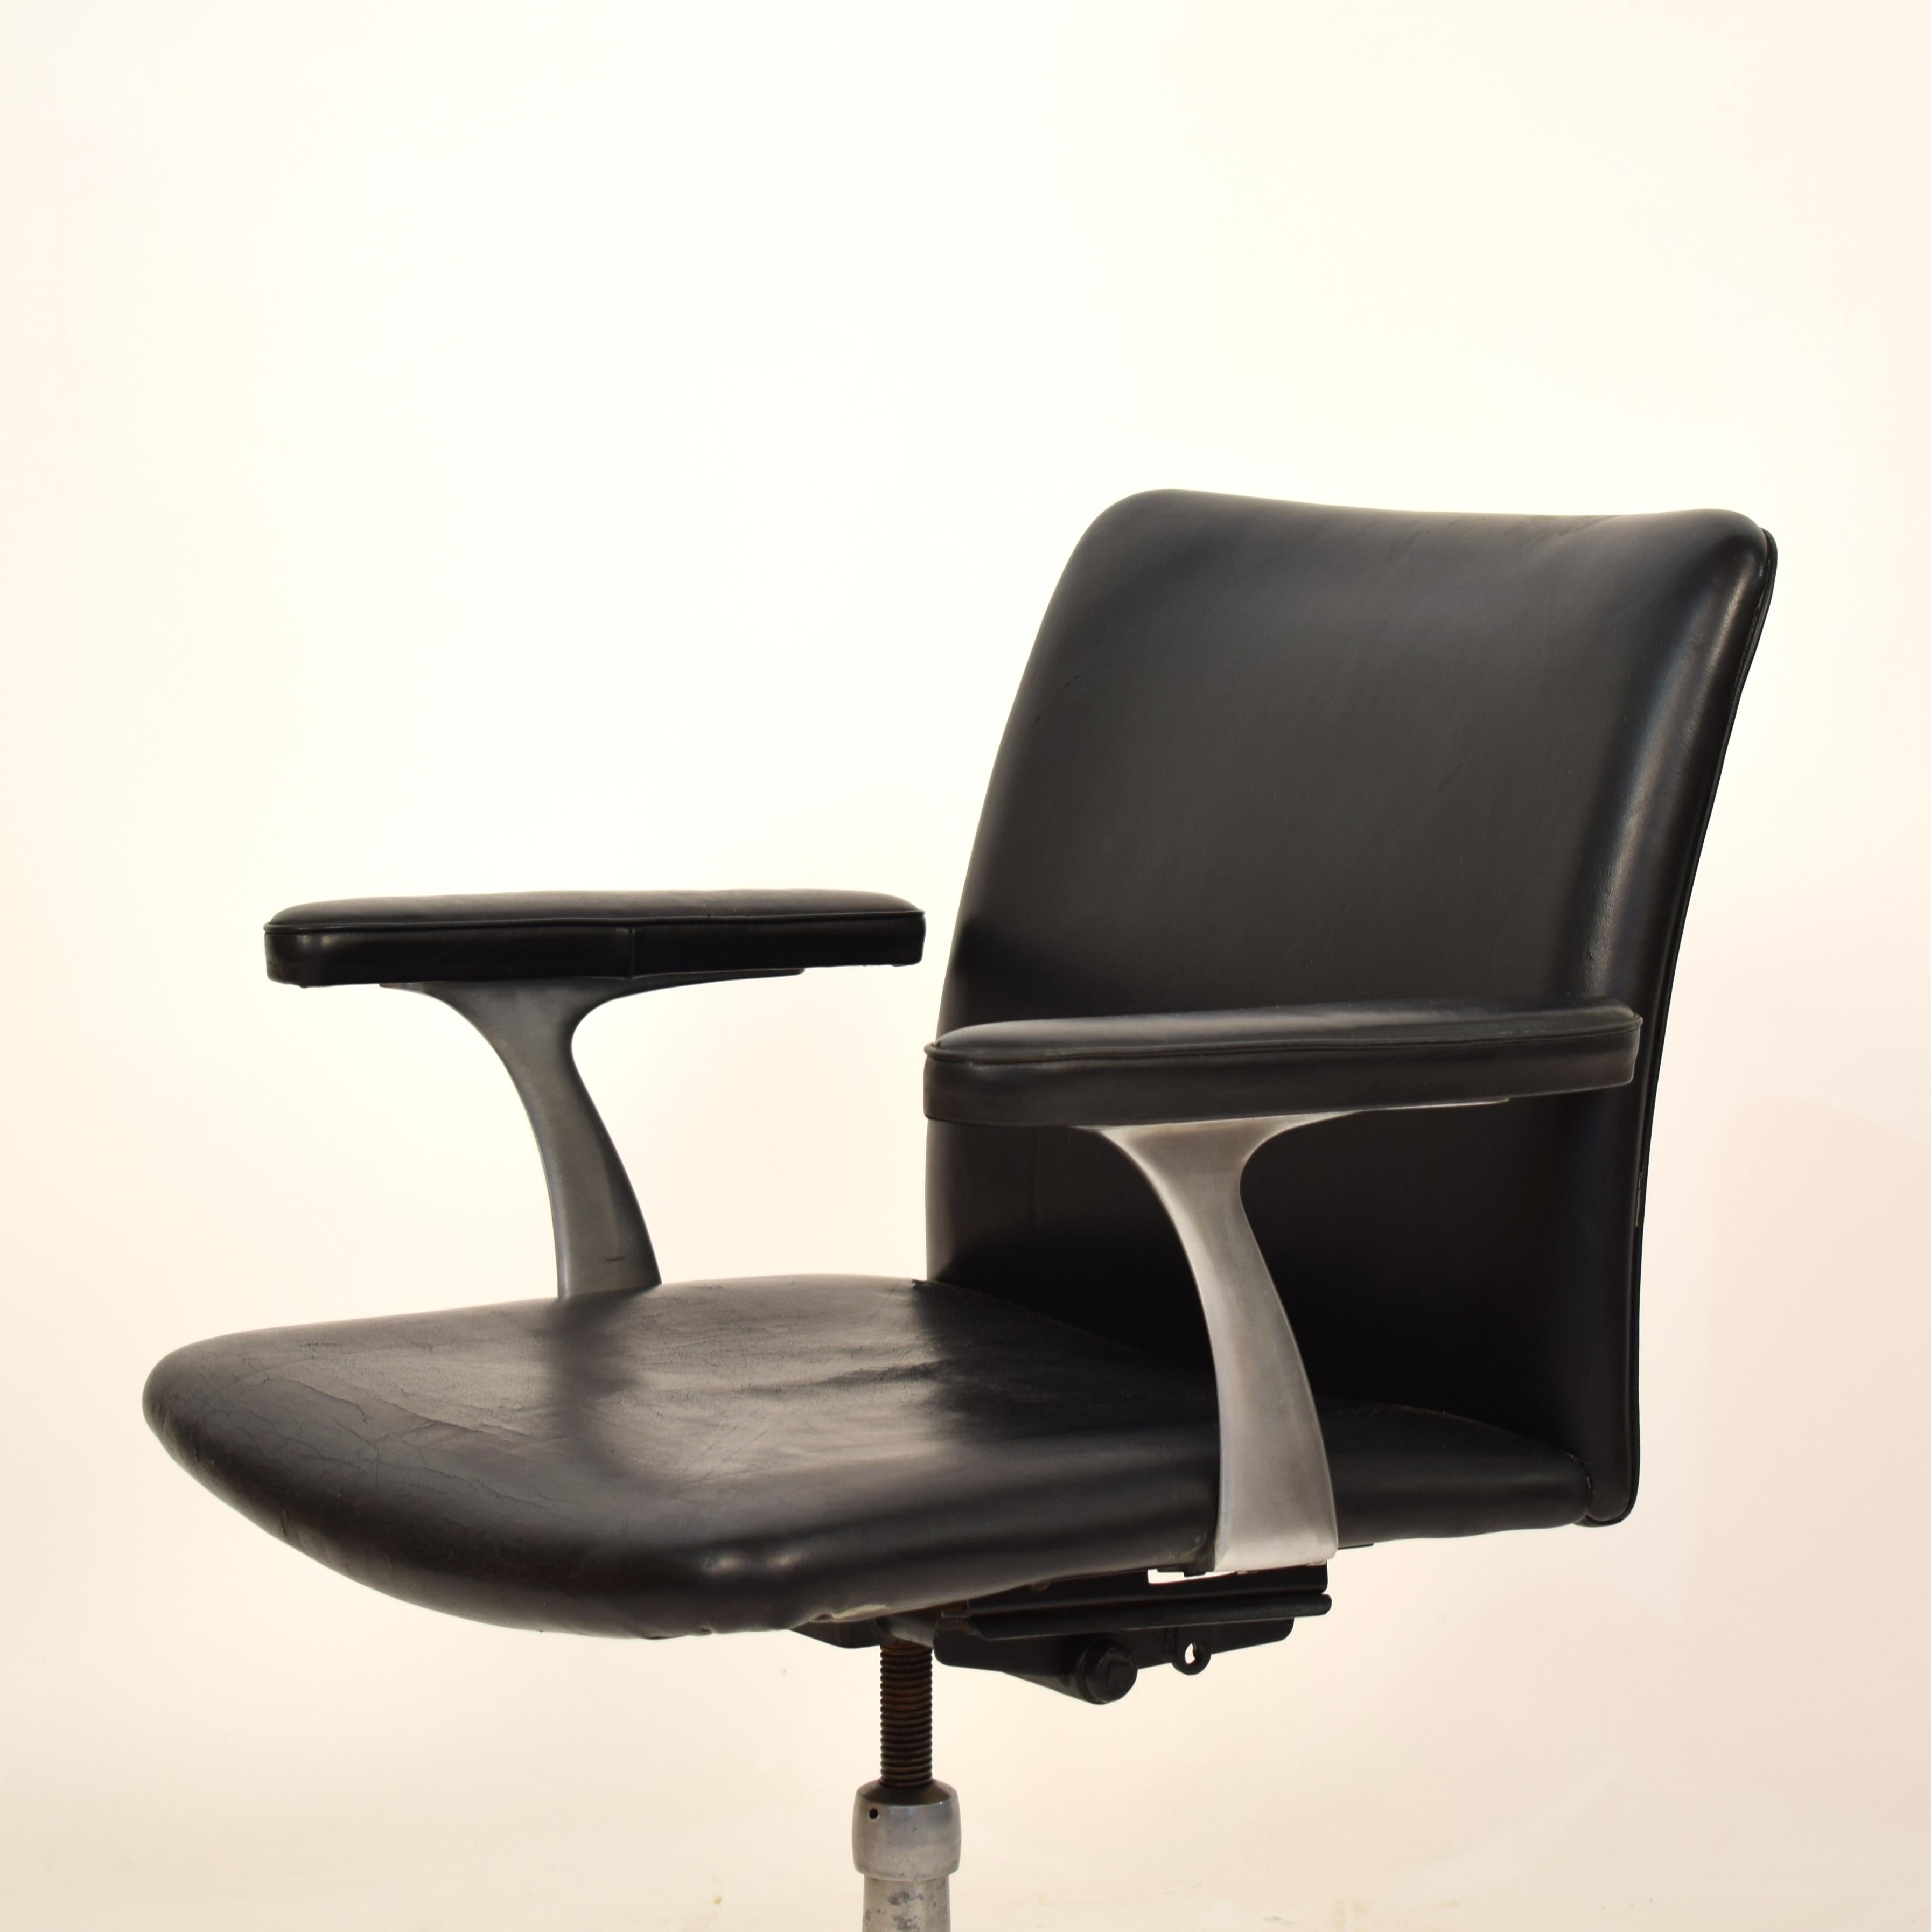 This midcentury Scandinavian armchair in black leather and aluminum was made circa 1970 in Denmark. It is tiltable. 
It is in good vintage condition with some wear on the leather but no cuts.
There are four of them available.

A unique piece